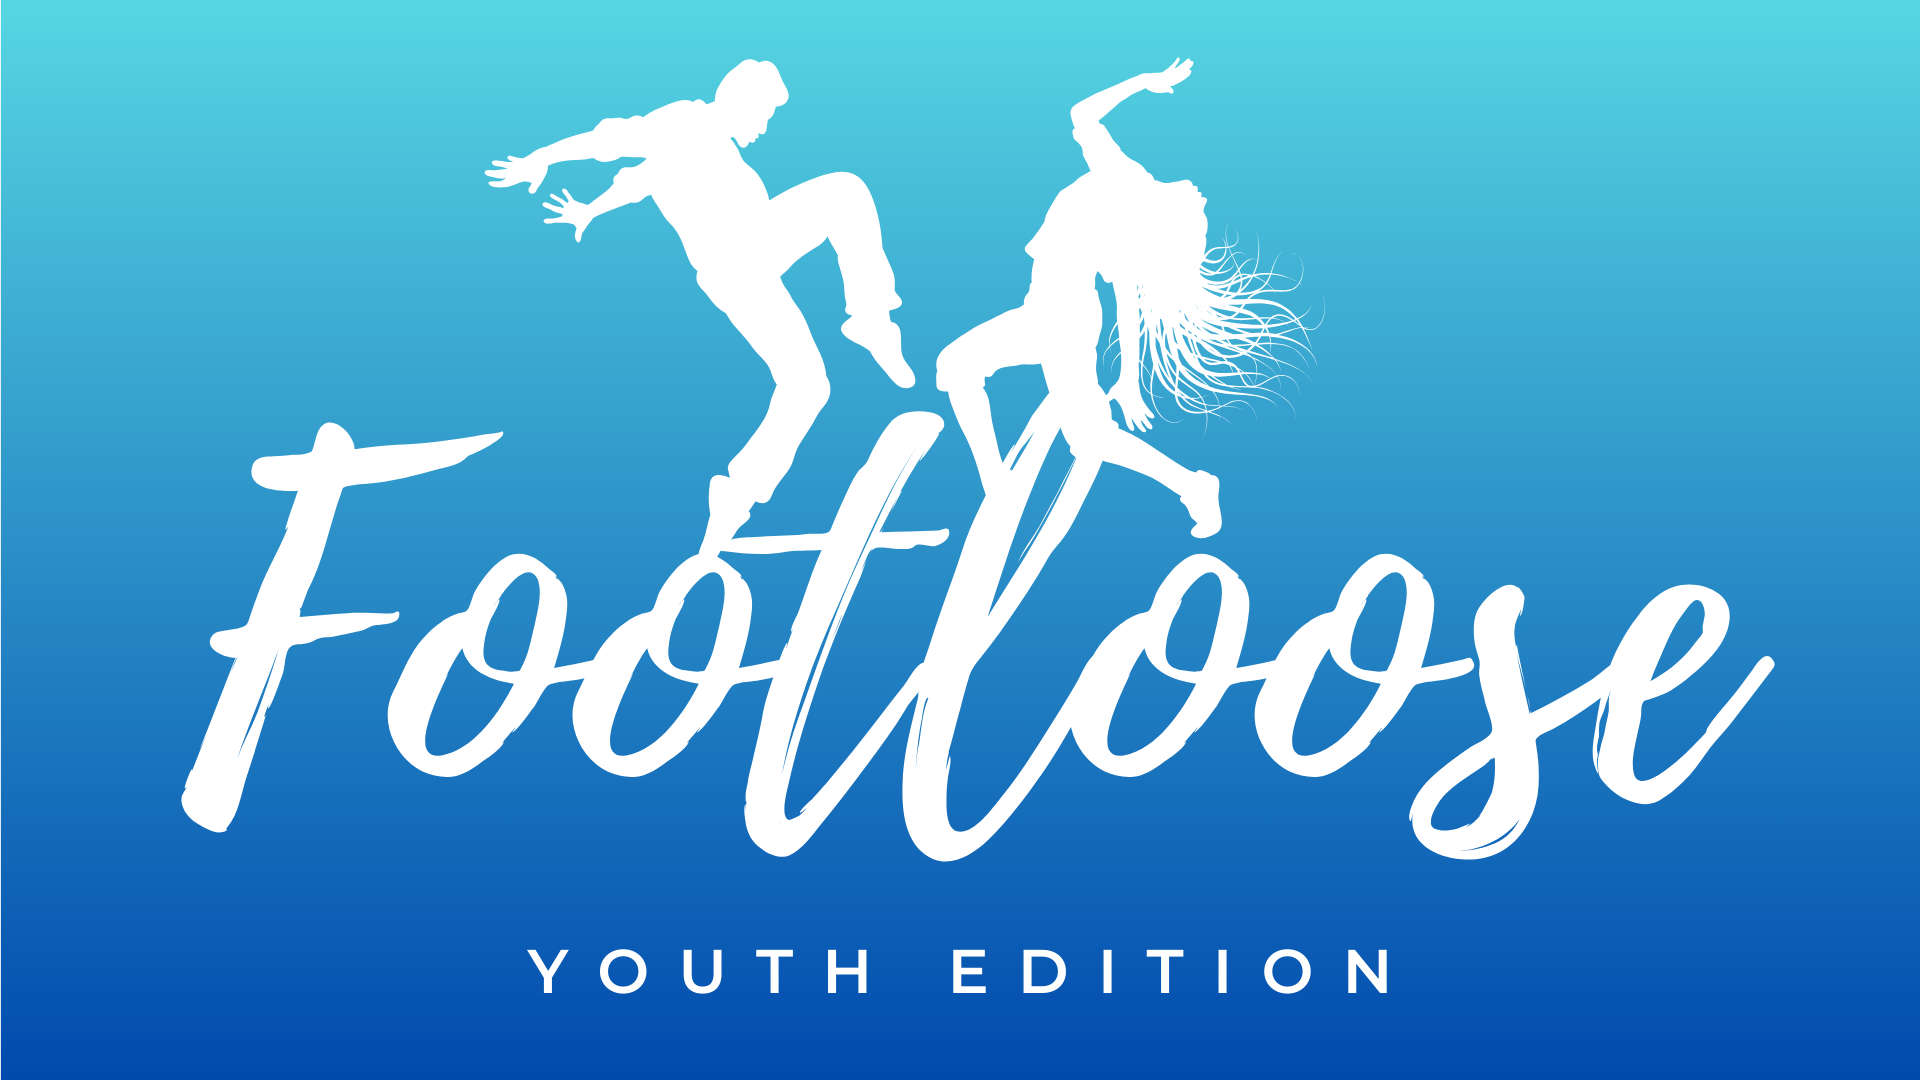 footloose-youth-edition